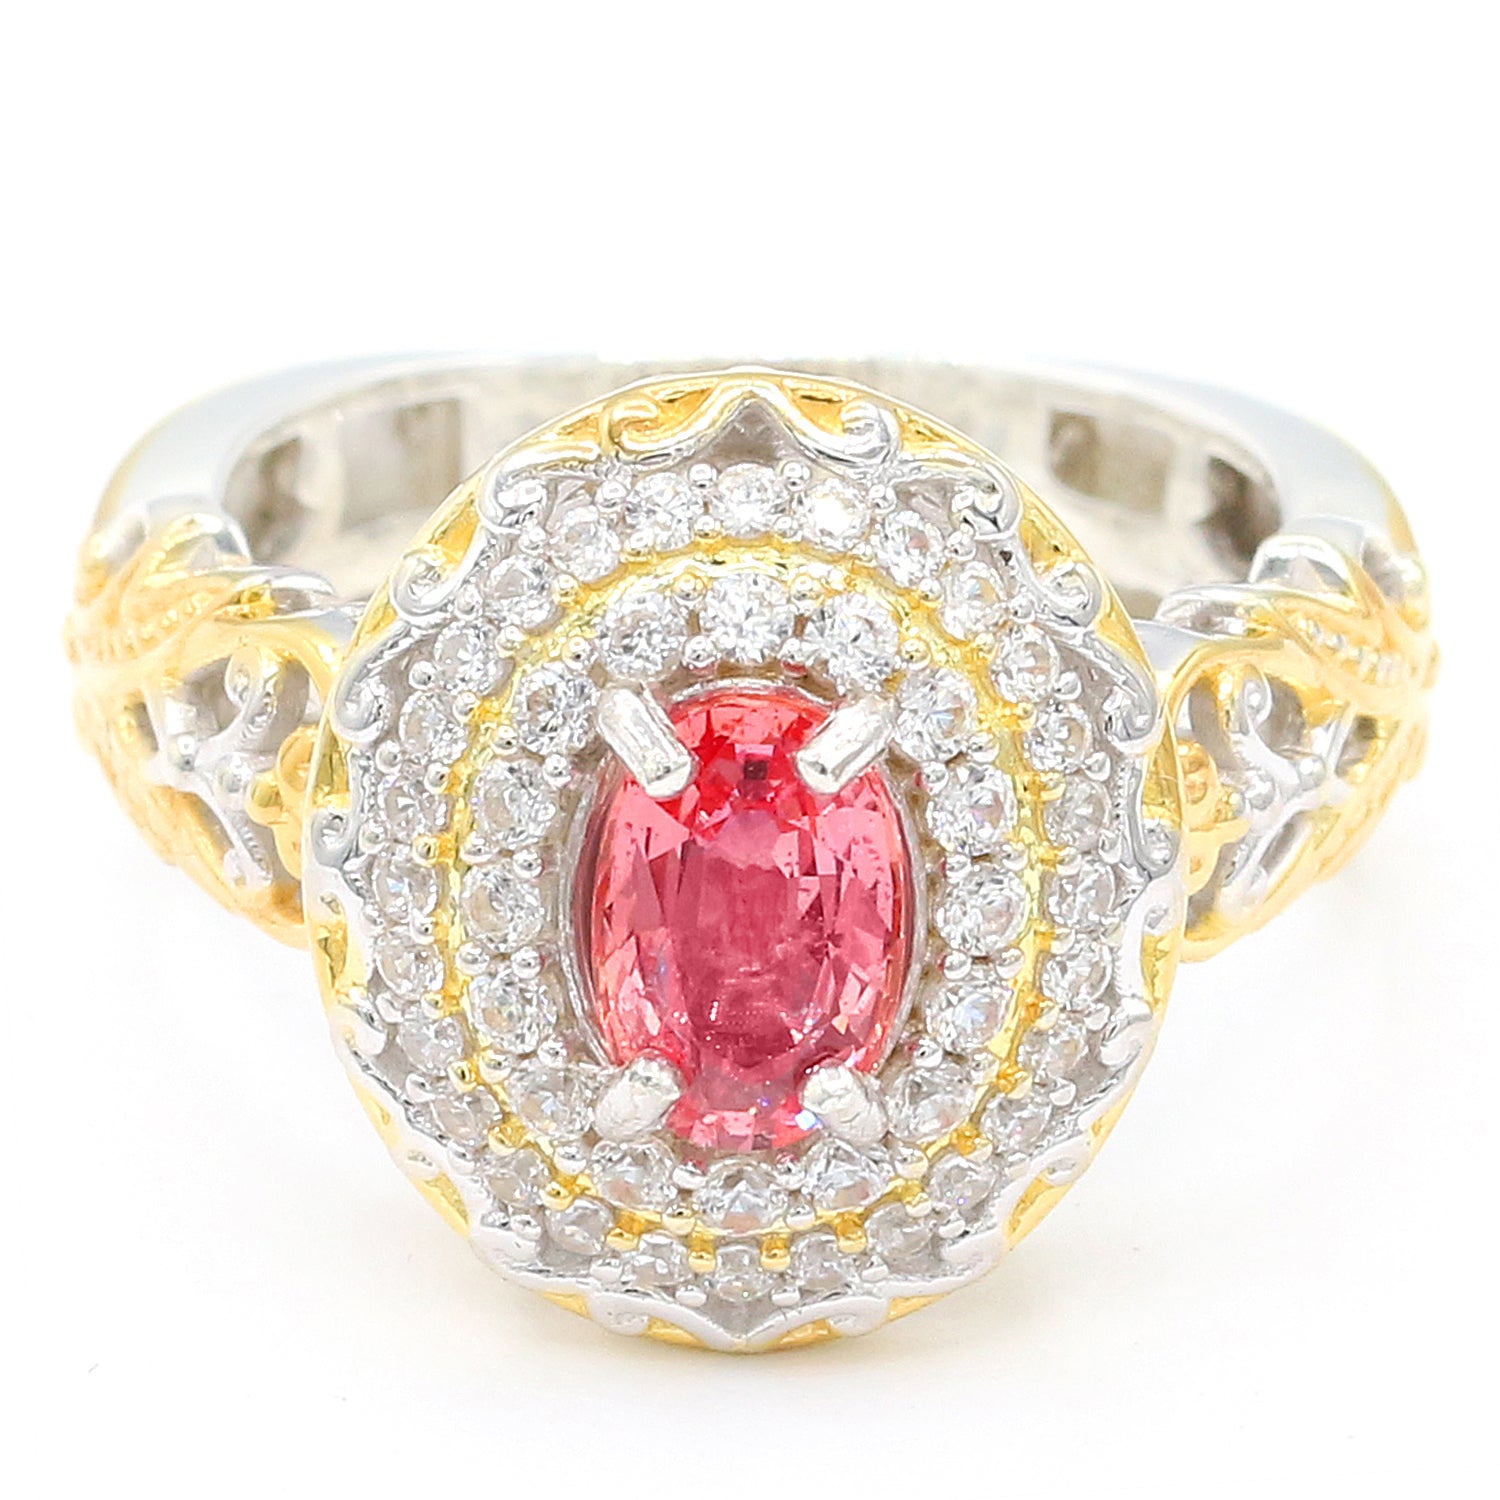 Limited Edition Gems en Vogue 2.26ctw Padparadscha Sapphire & White Zircon Double Halo Ring